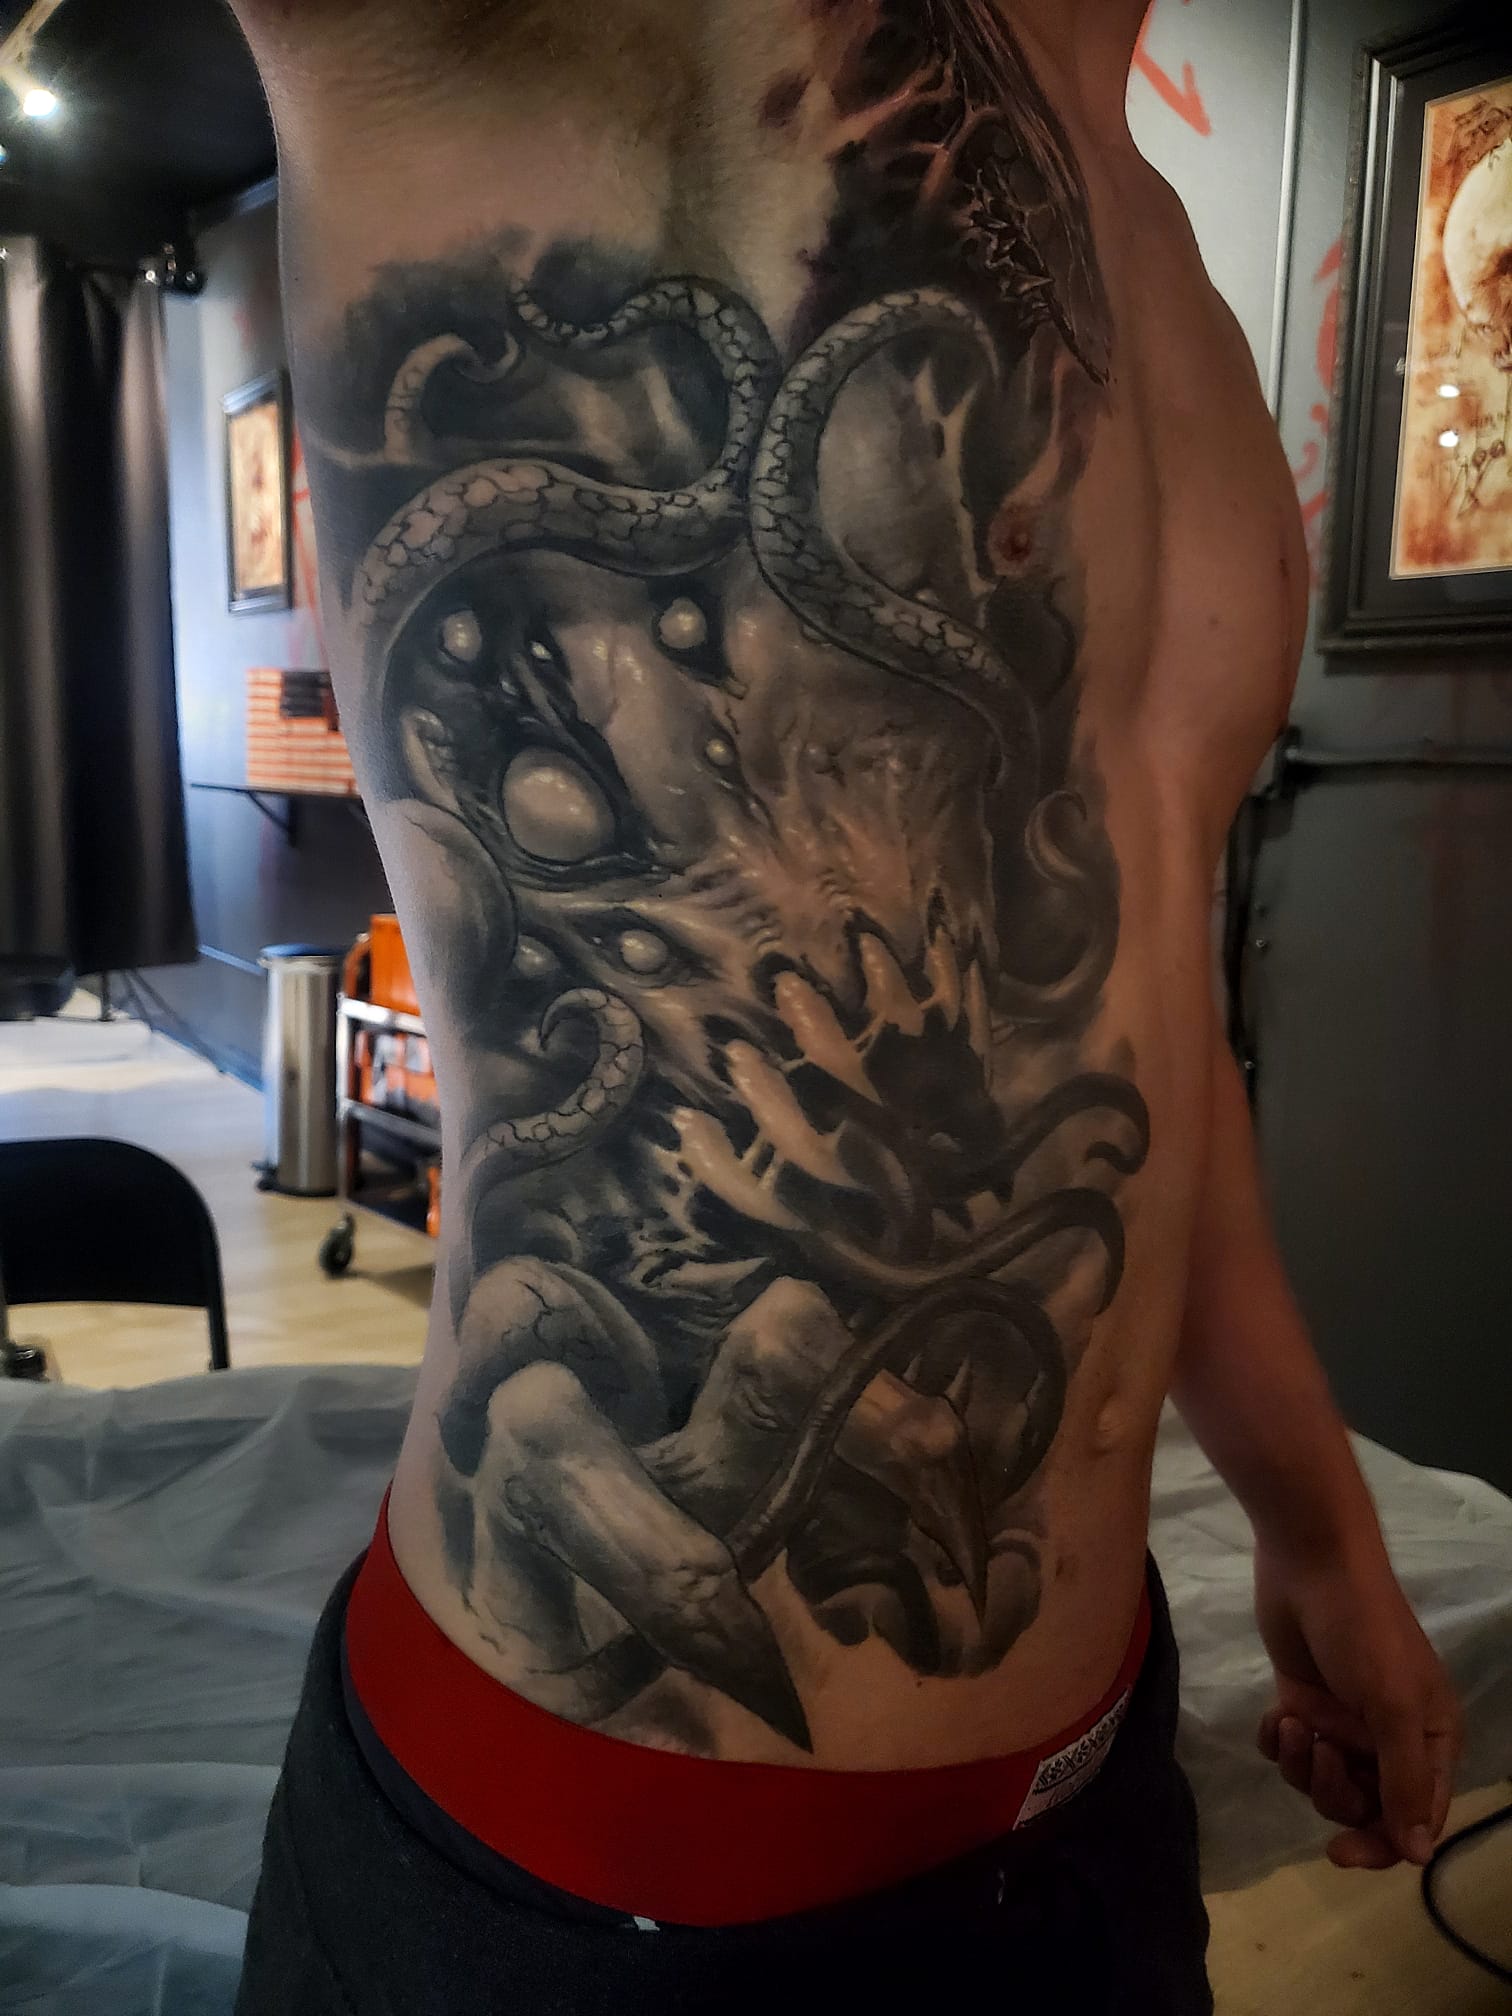 Healed Monster with Tentacles and Hand on Torso